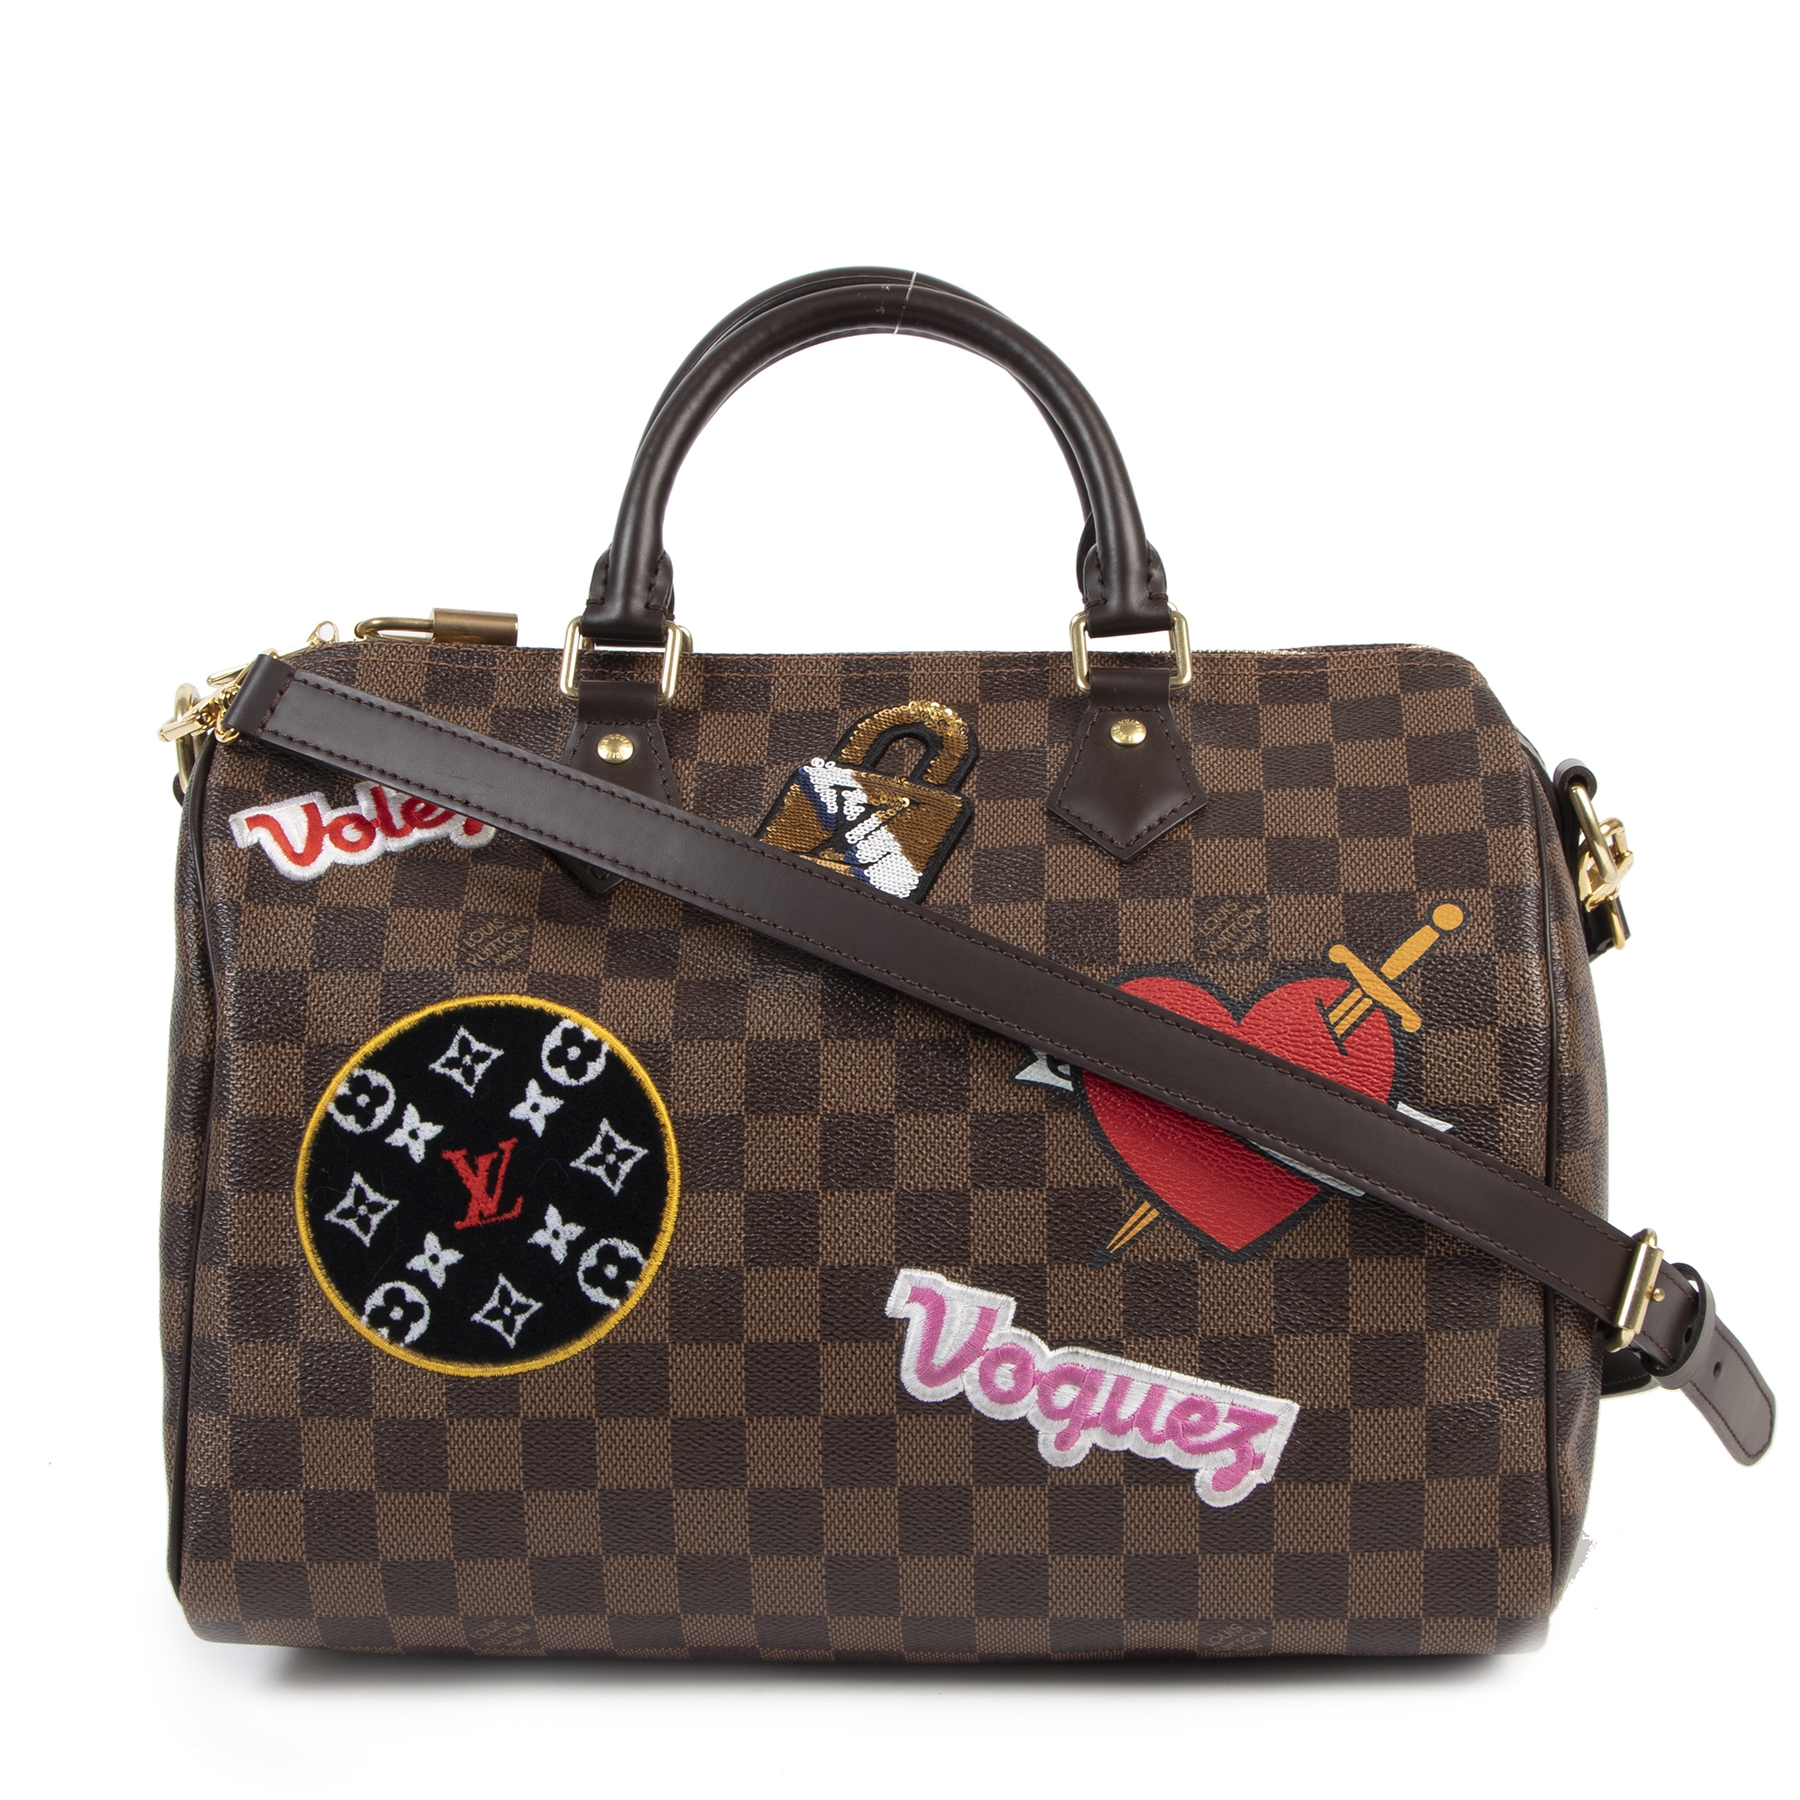 Louis Vuitton Speedy Bandouliere Bag Limited Edition Patches